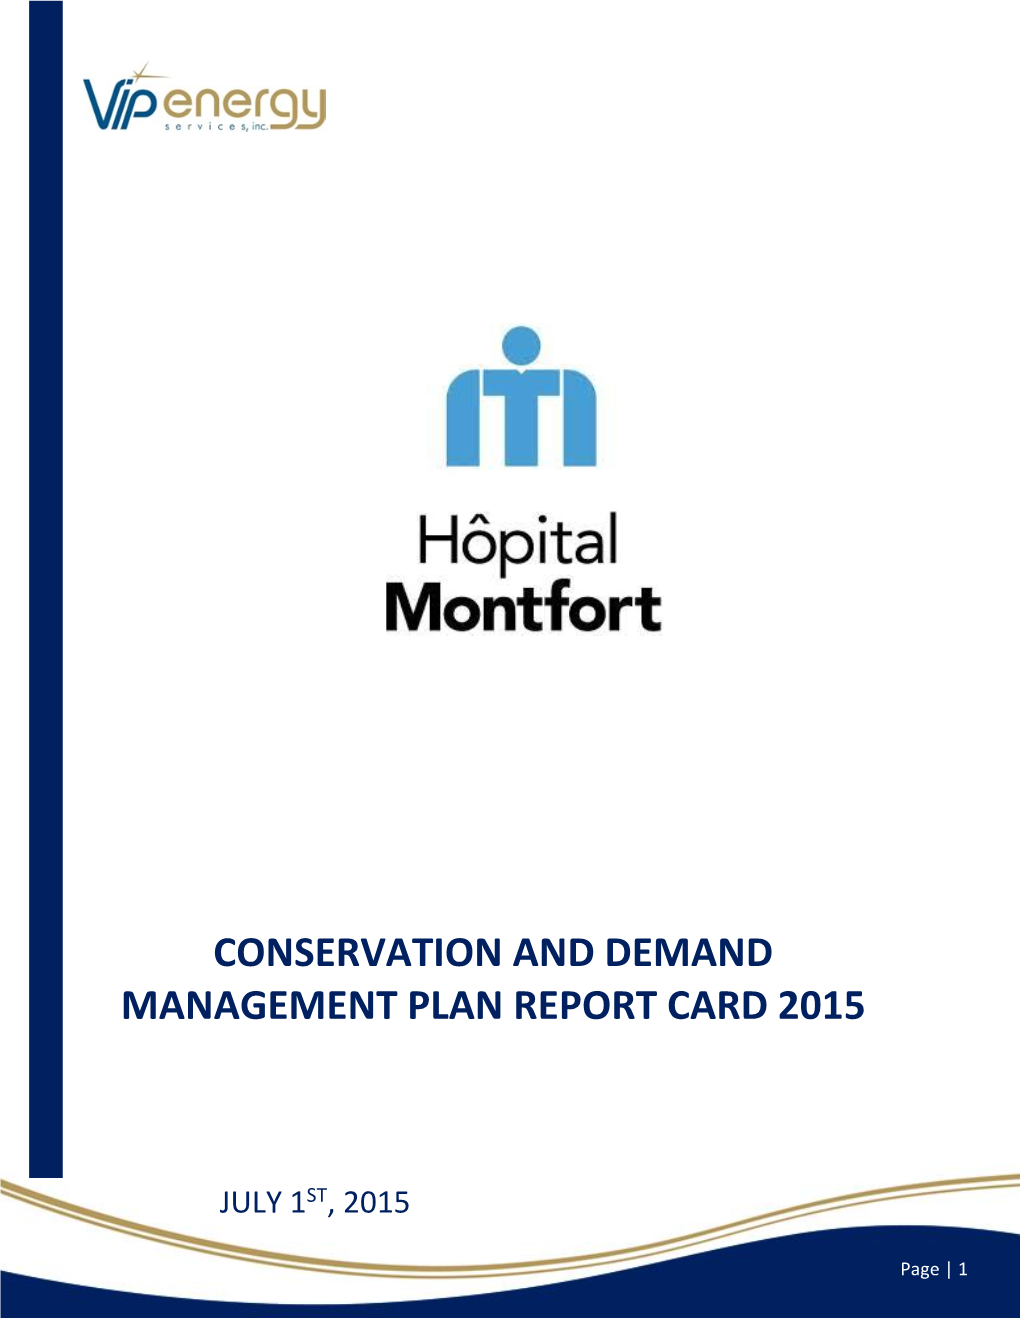 Conservation and Demand Management Plan Report Card 2015